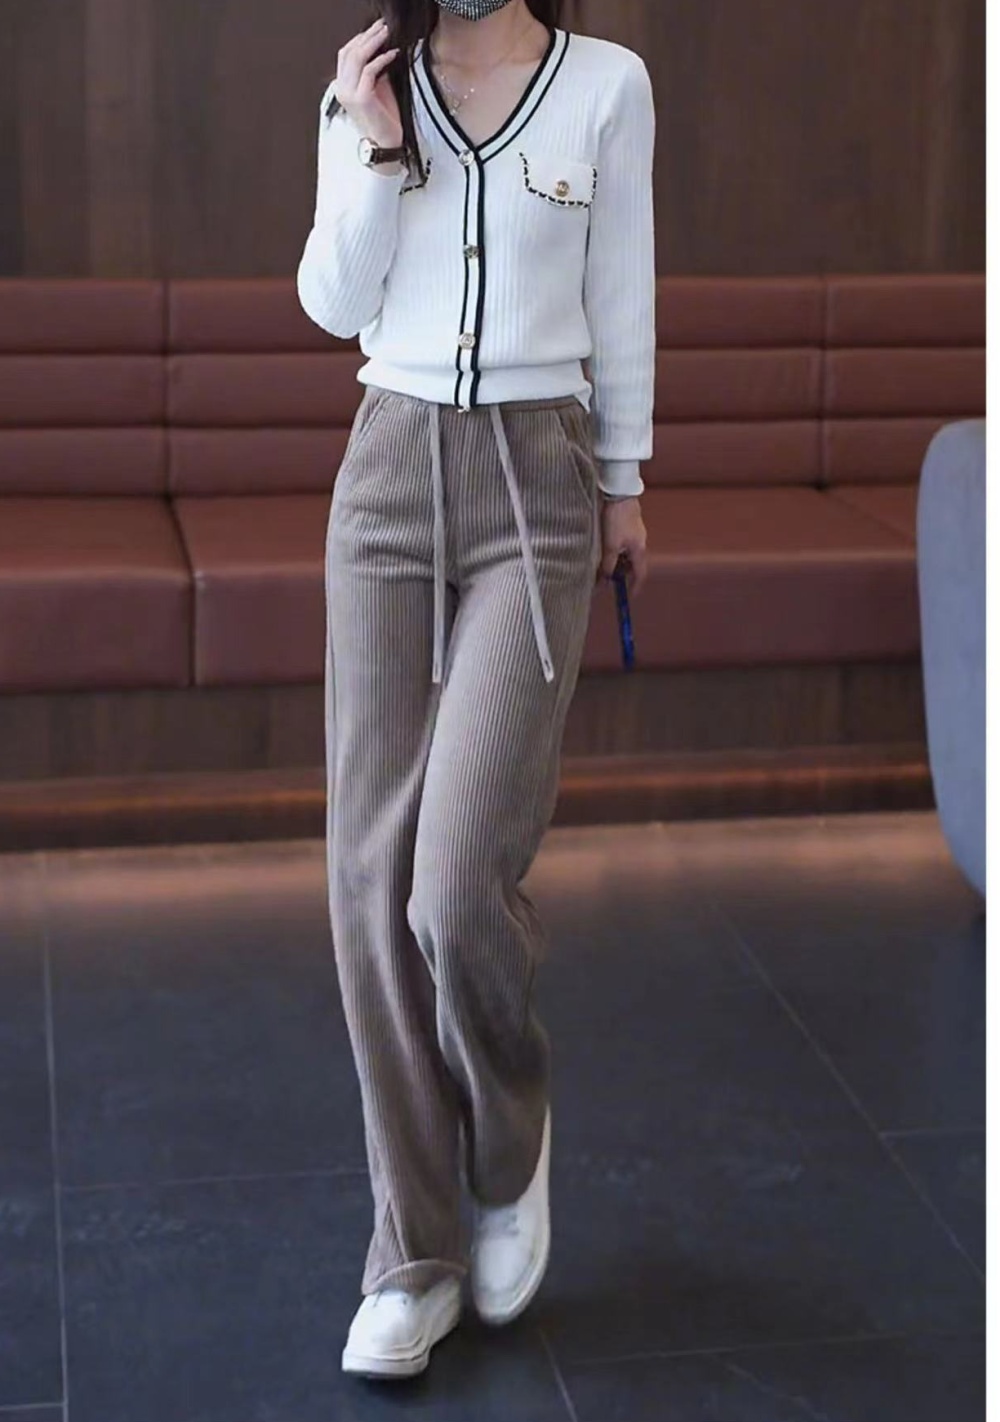 Autumn and winter pants wide leg pants for women